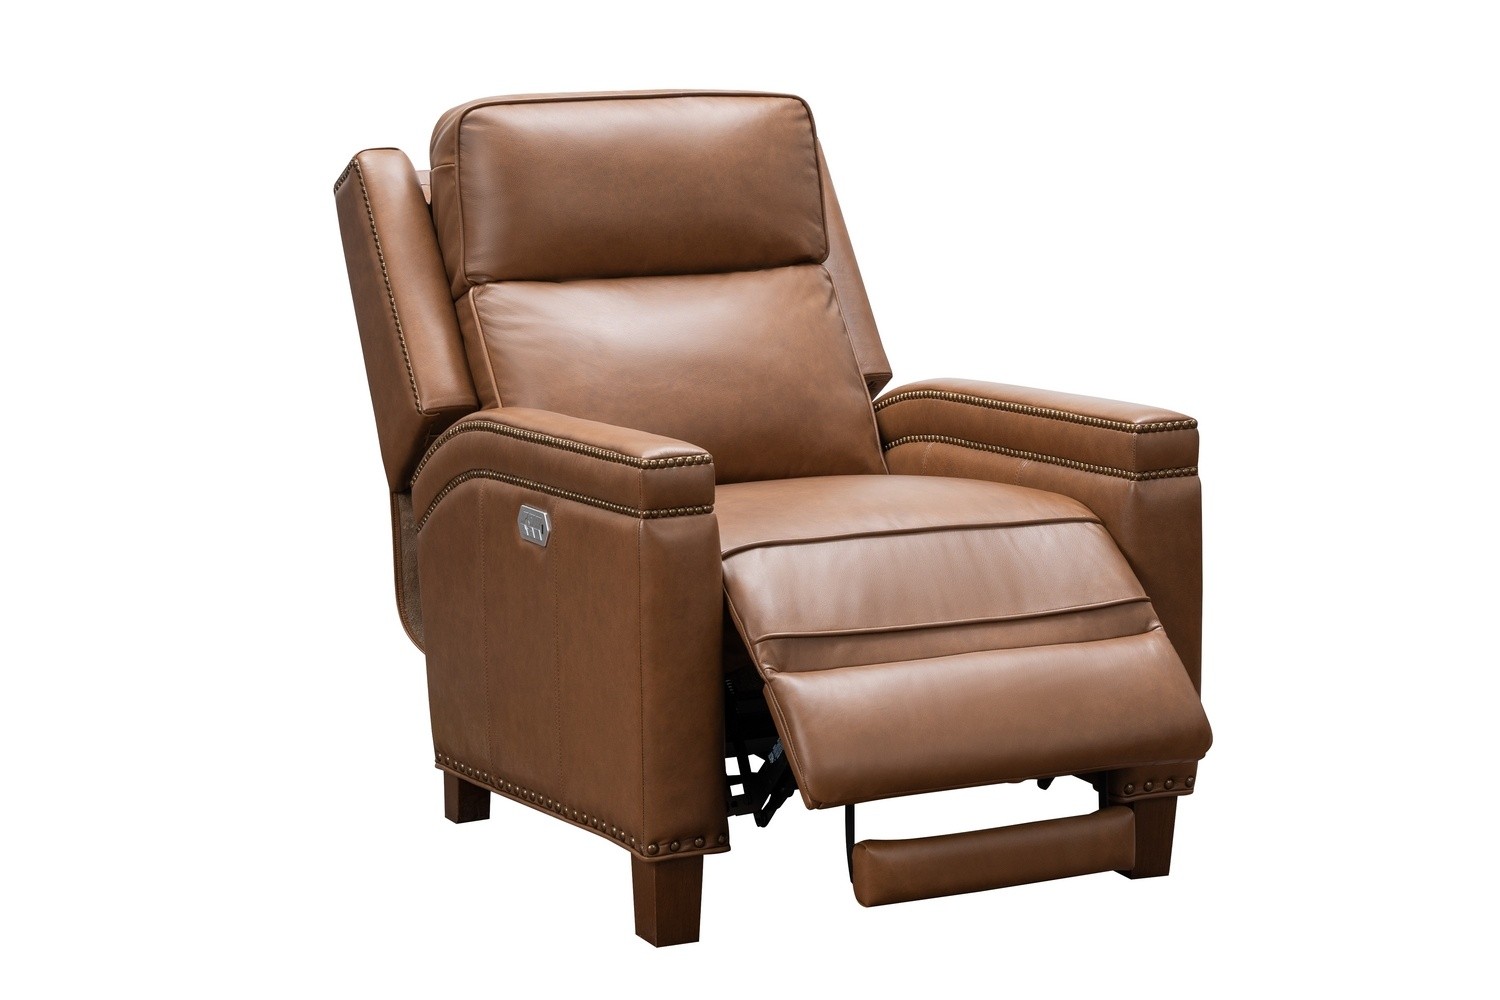 Barcalounger Smithfield Big and Tall Power Recliner Chair with Power Head Rest and Lumbar - Bennington Saddle/All Leather